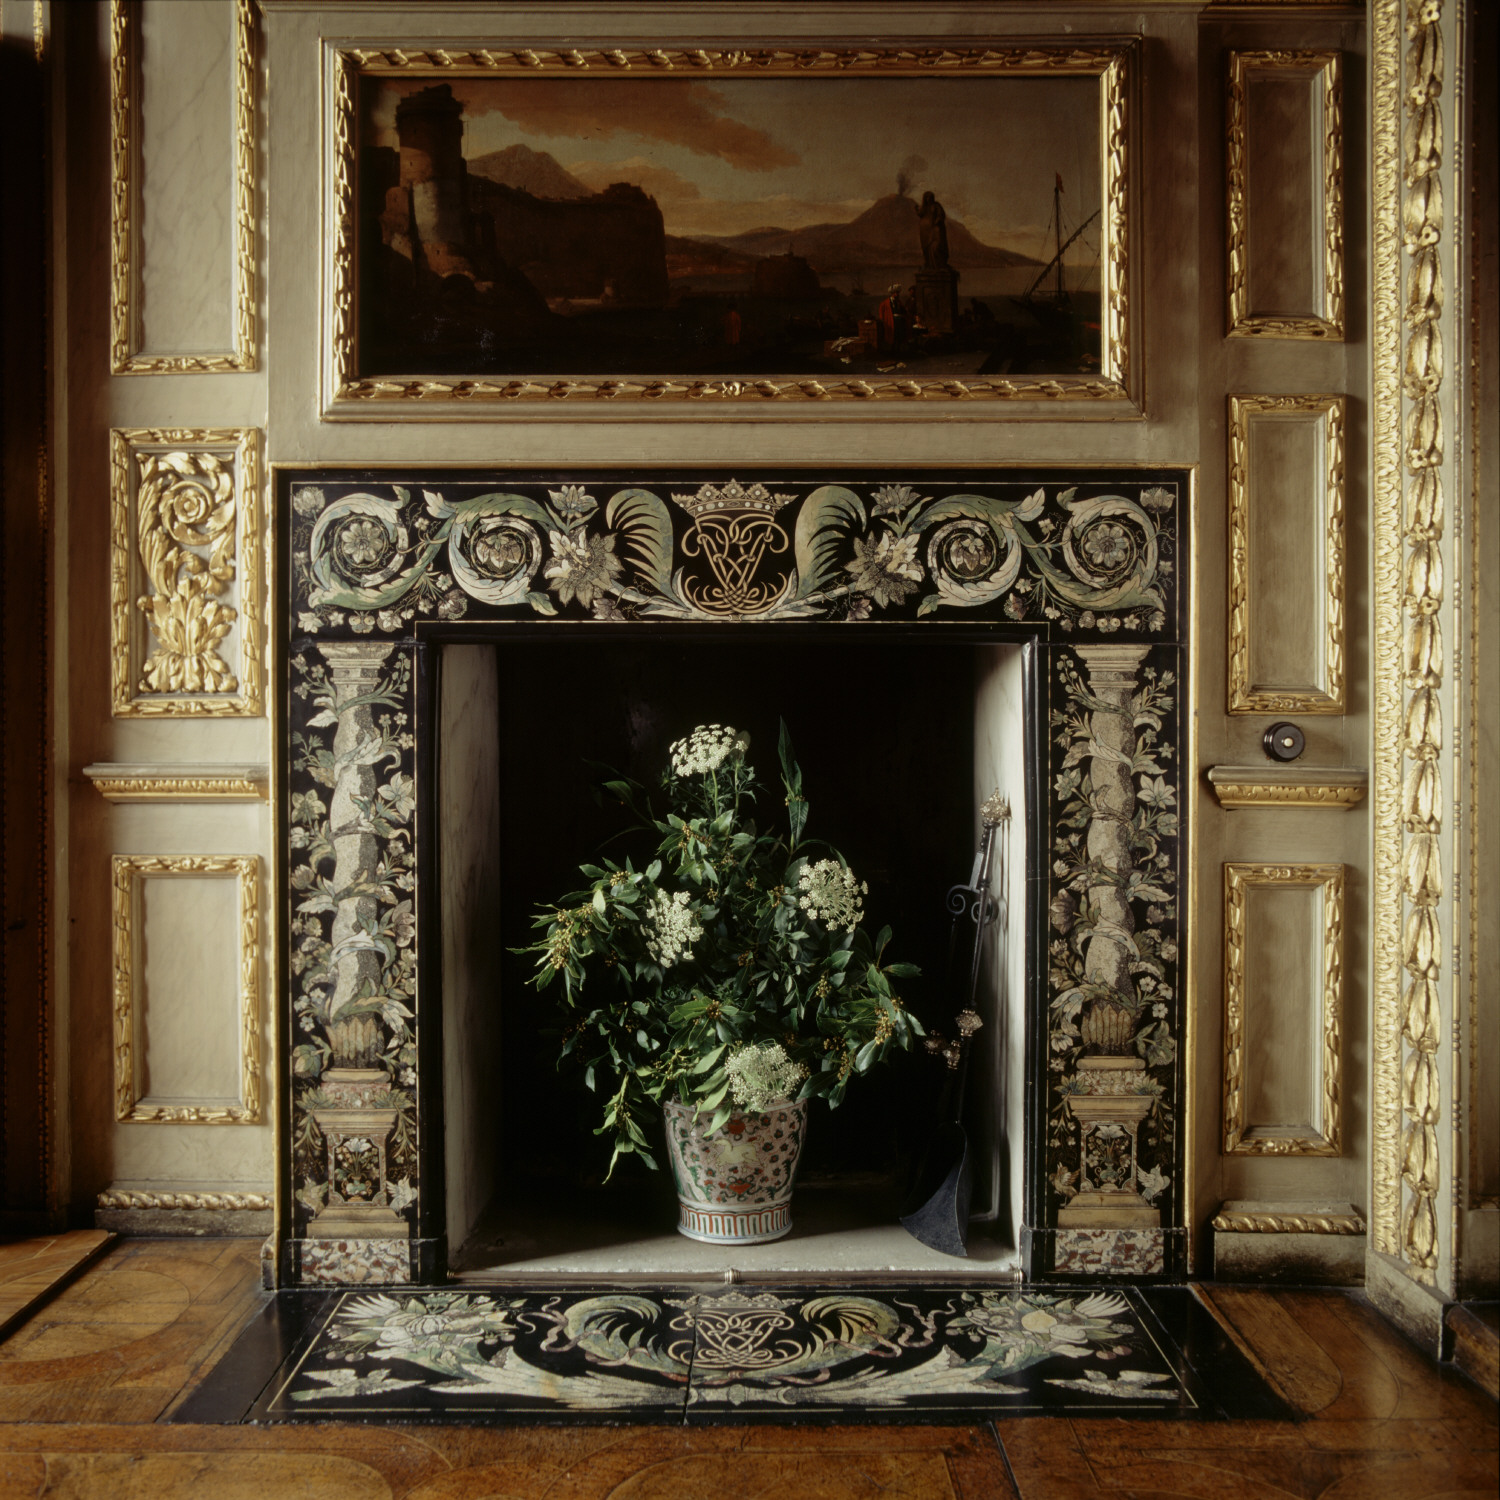 Ornate fireplace with vase of cream flowers in its hearth. The surround has cream coloured carving on a black background.